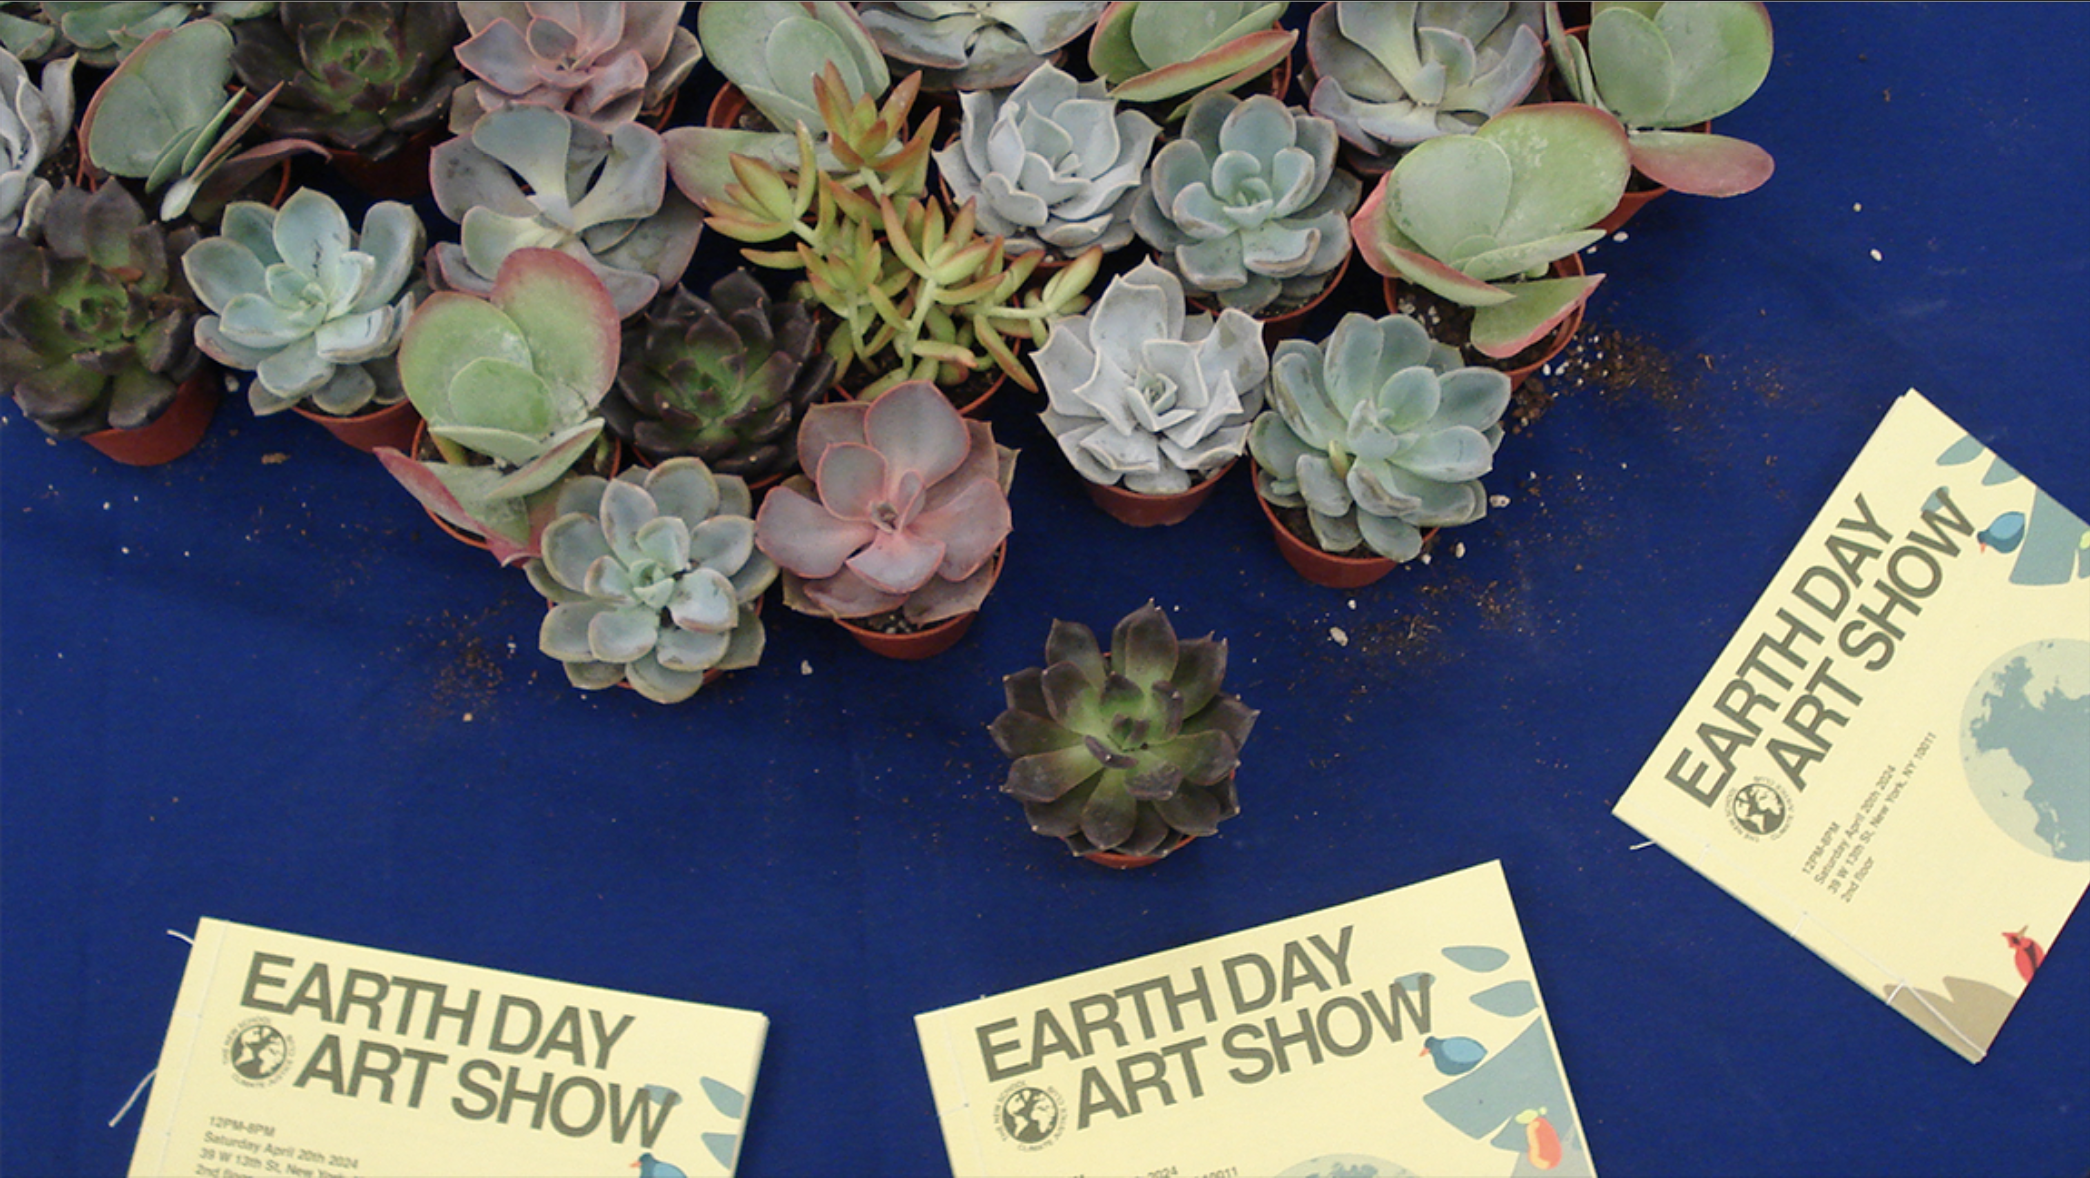 A variety of small succulents on a dark blue tablecloth cover the top half of the image. Below, booklets with “Earth Day Art Show” spelled on them are arranged.